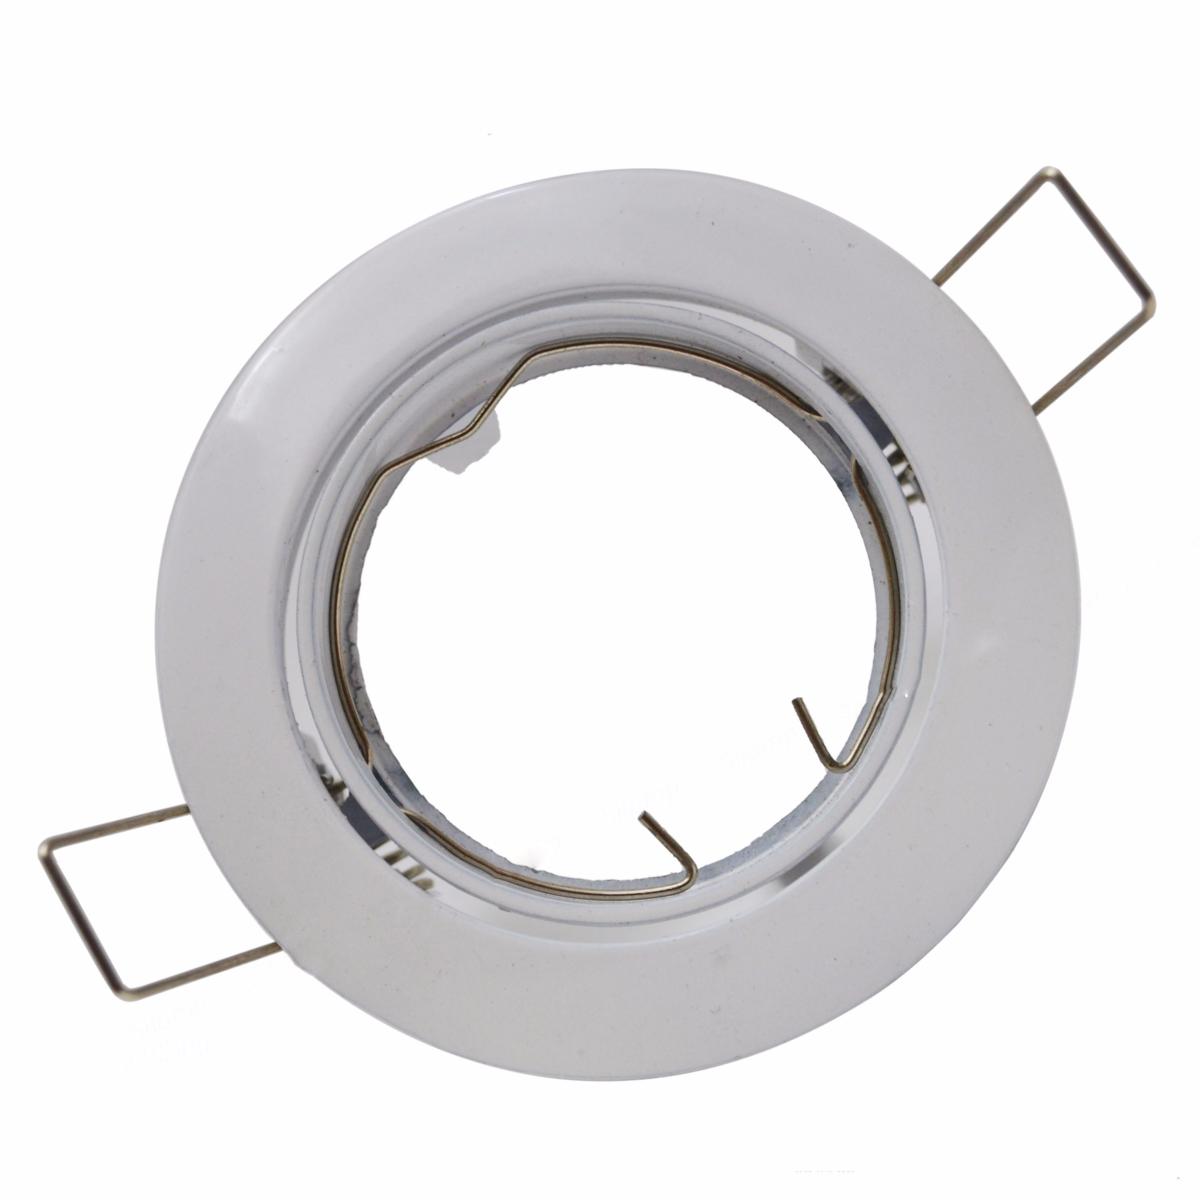 Support Spot GU10 LED Orientable BLANC - Silamp France